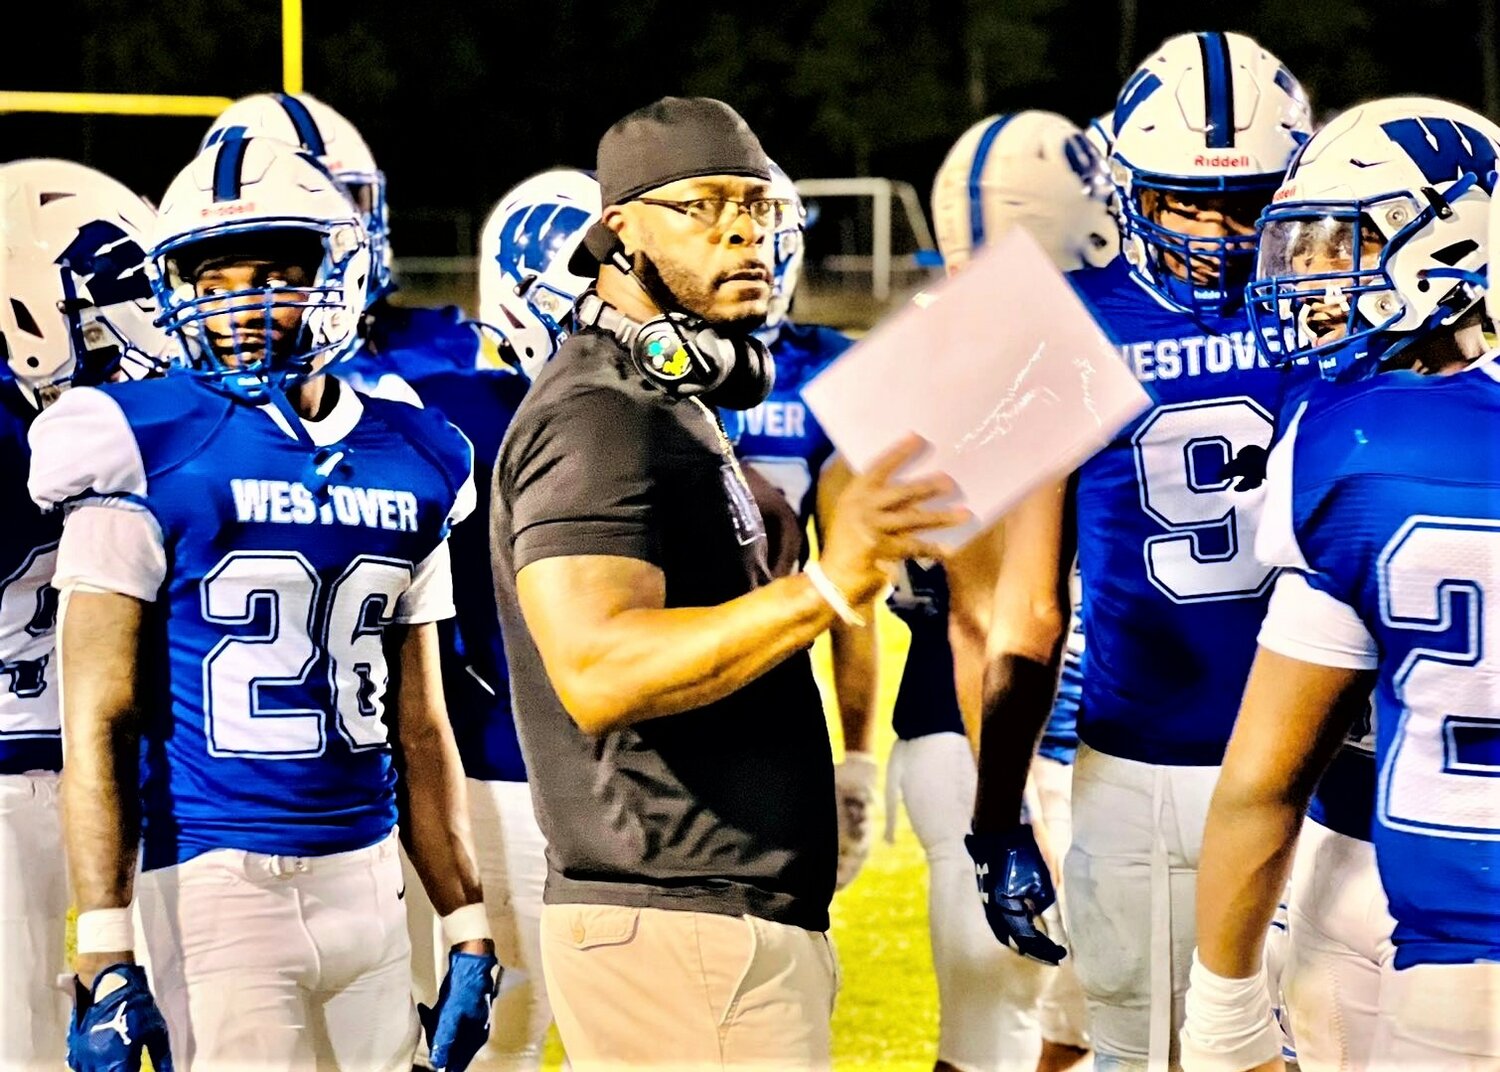 Coach Ernest King huddles with his players on the Westover High football team.